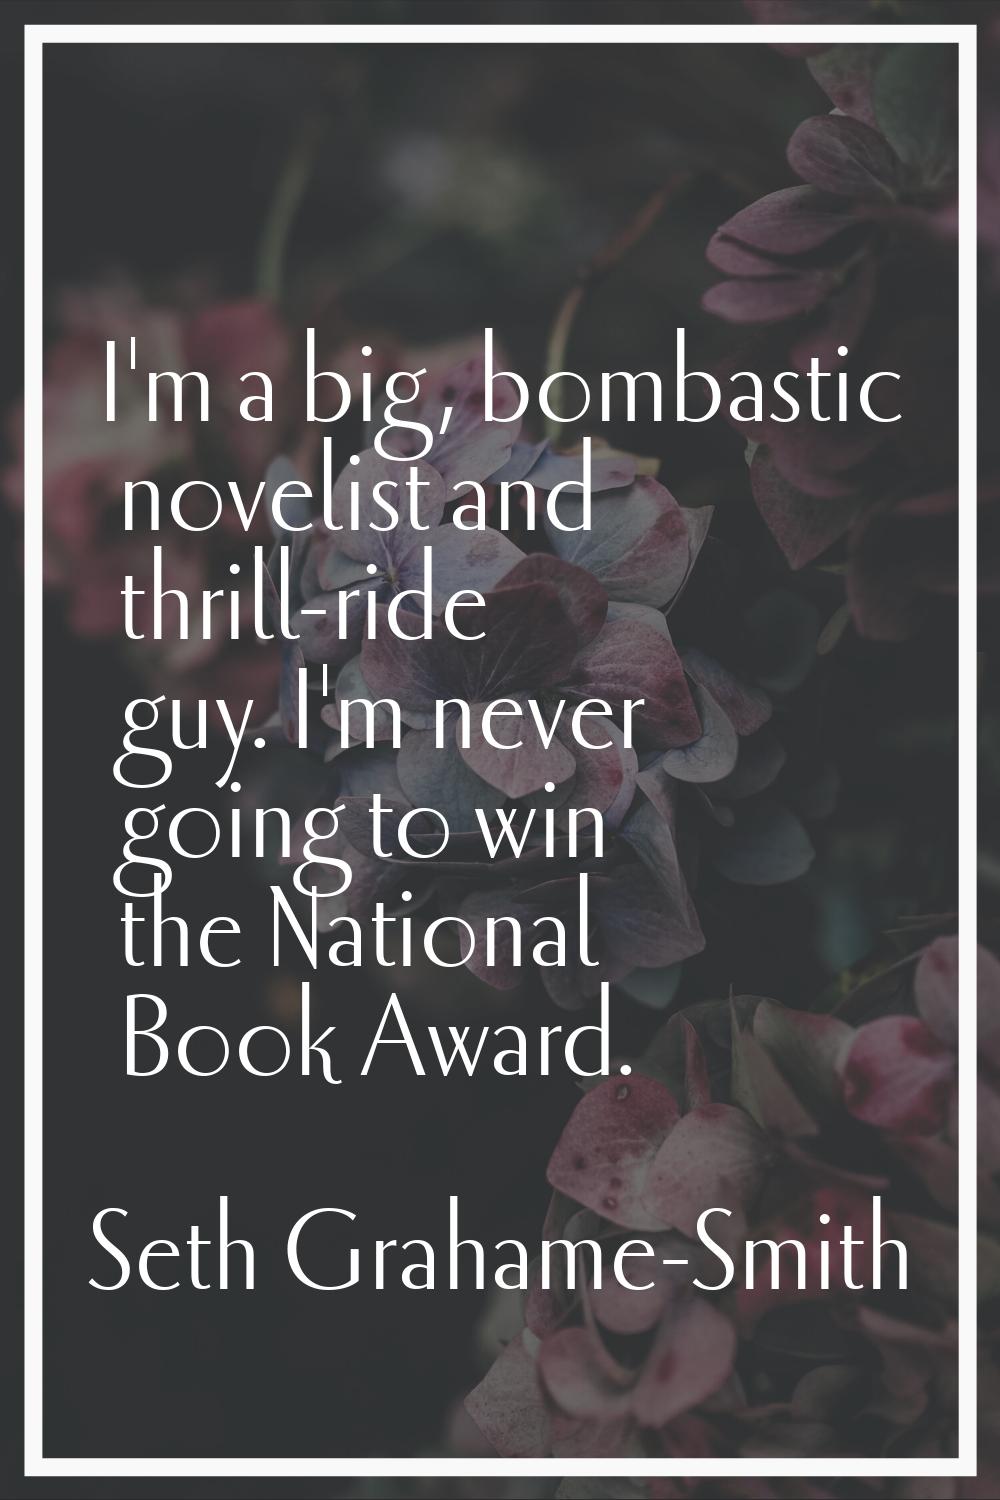 I'm a big, bombastic novelist and thrill-ride guy. I'm never going to win the National Book Award.